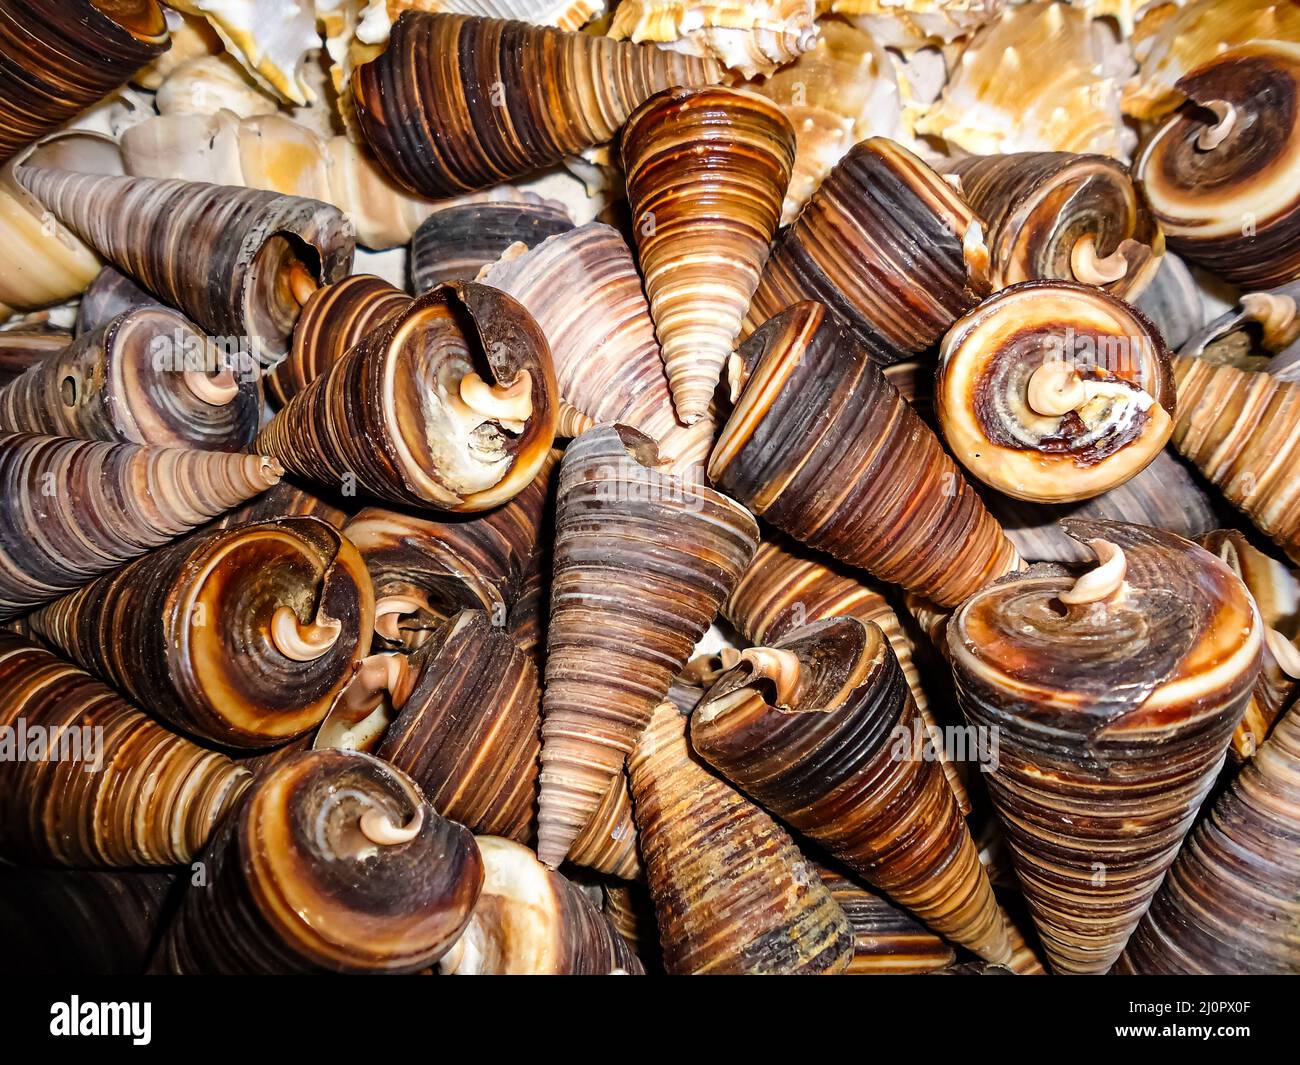 shell of snail in the shop of cox's bazar Stock Photo